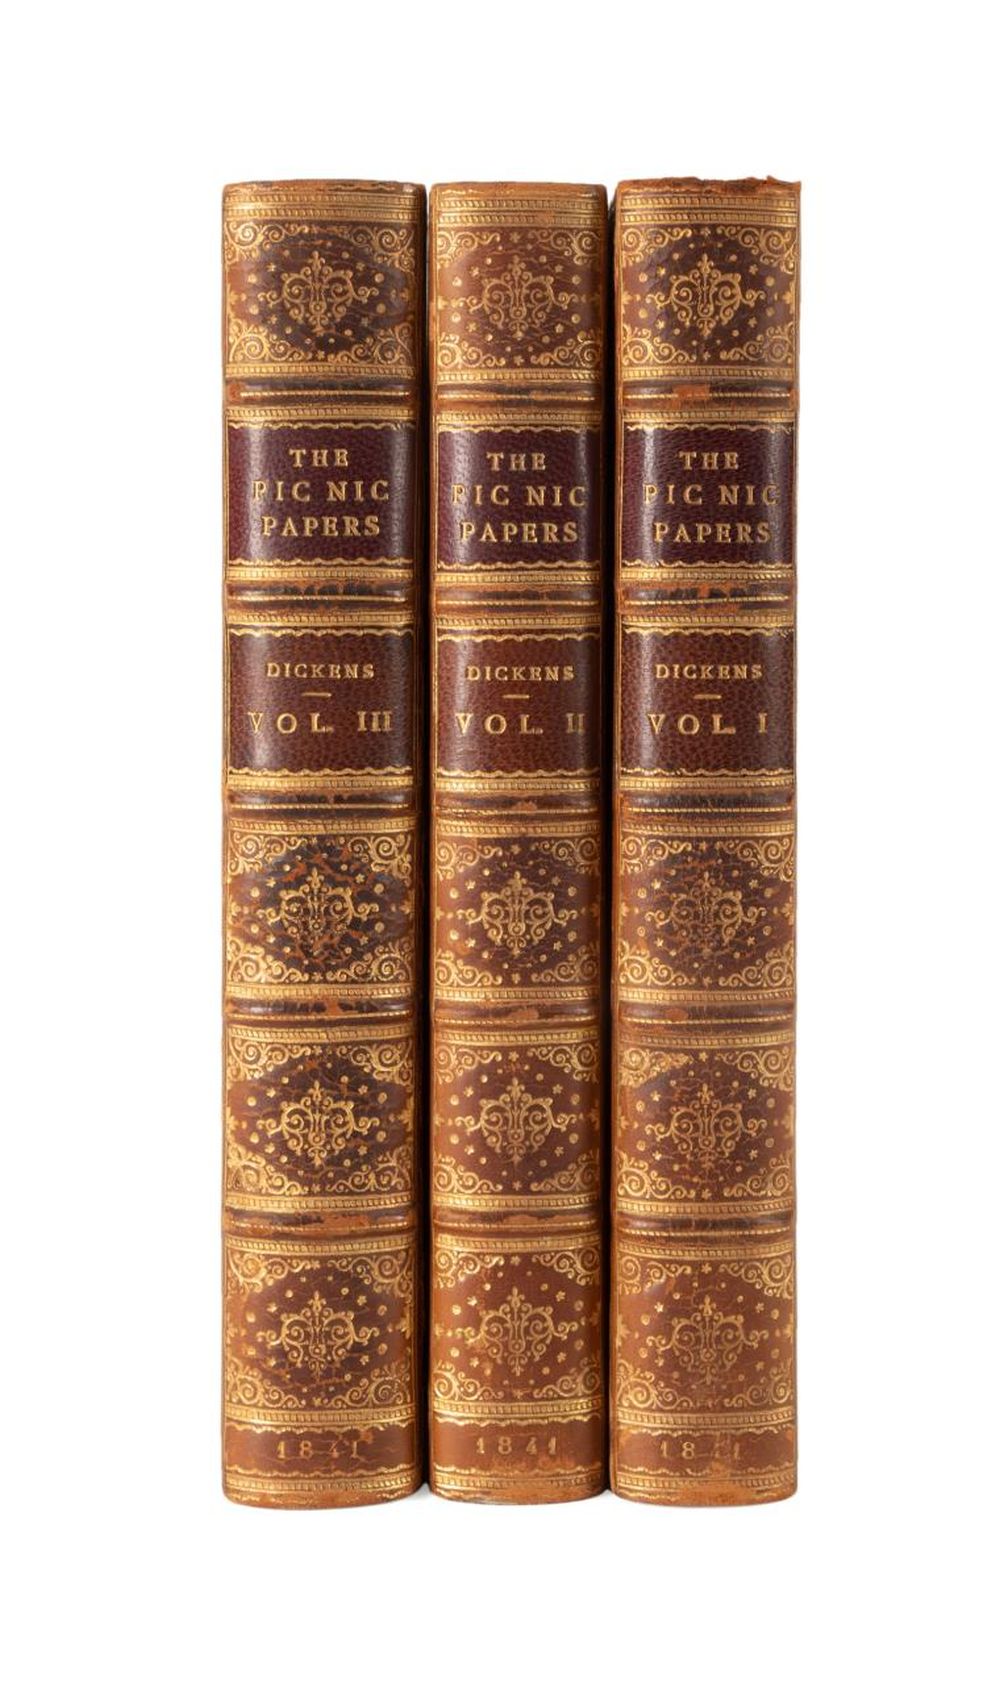 3VOL CHARLES DICKENS, THE PIC NIC